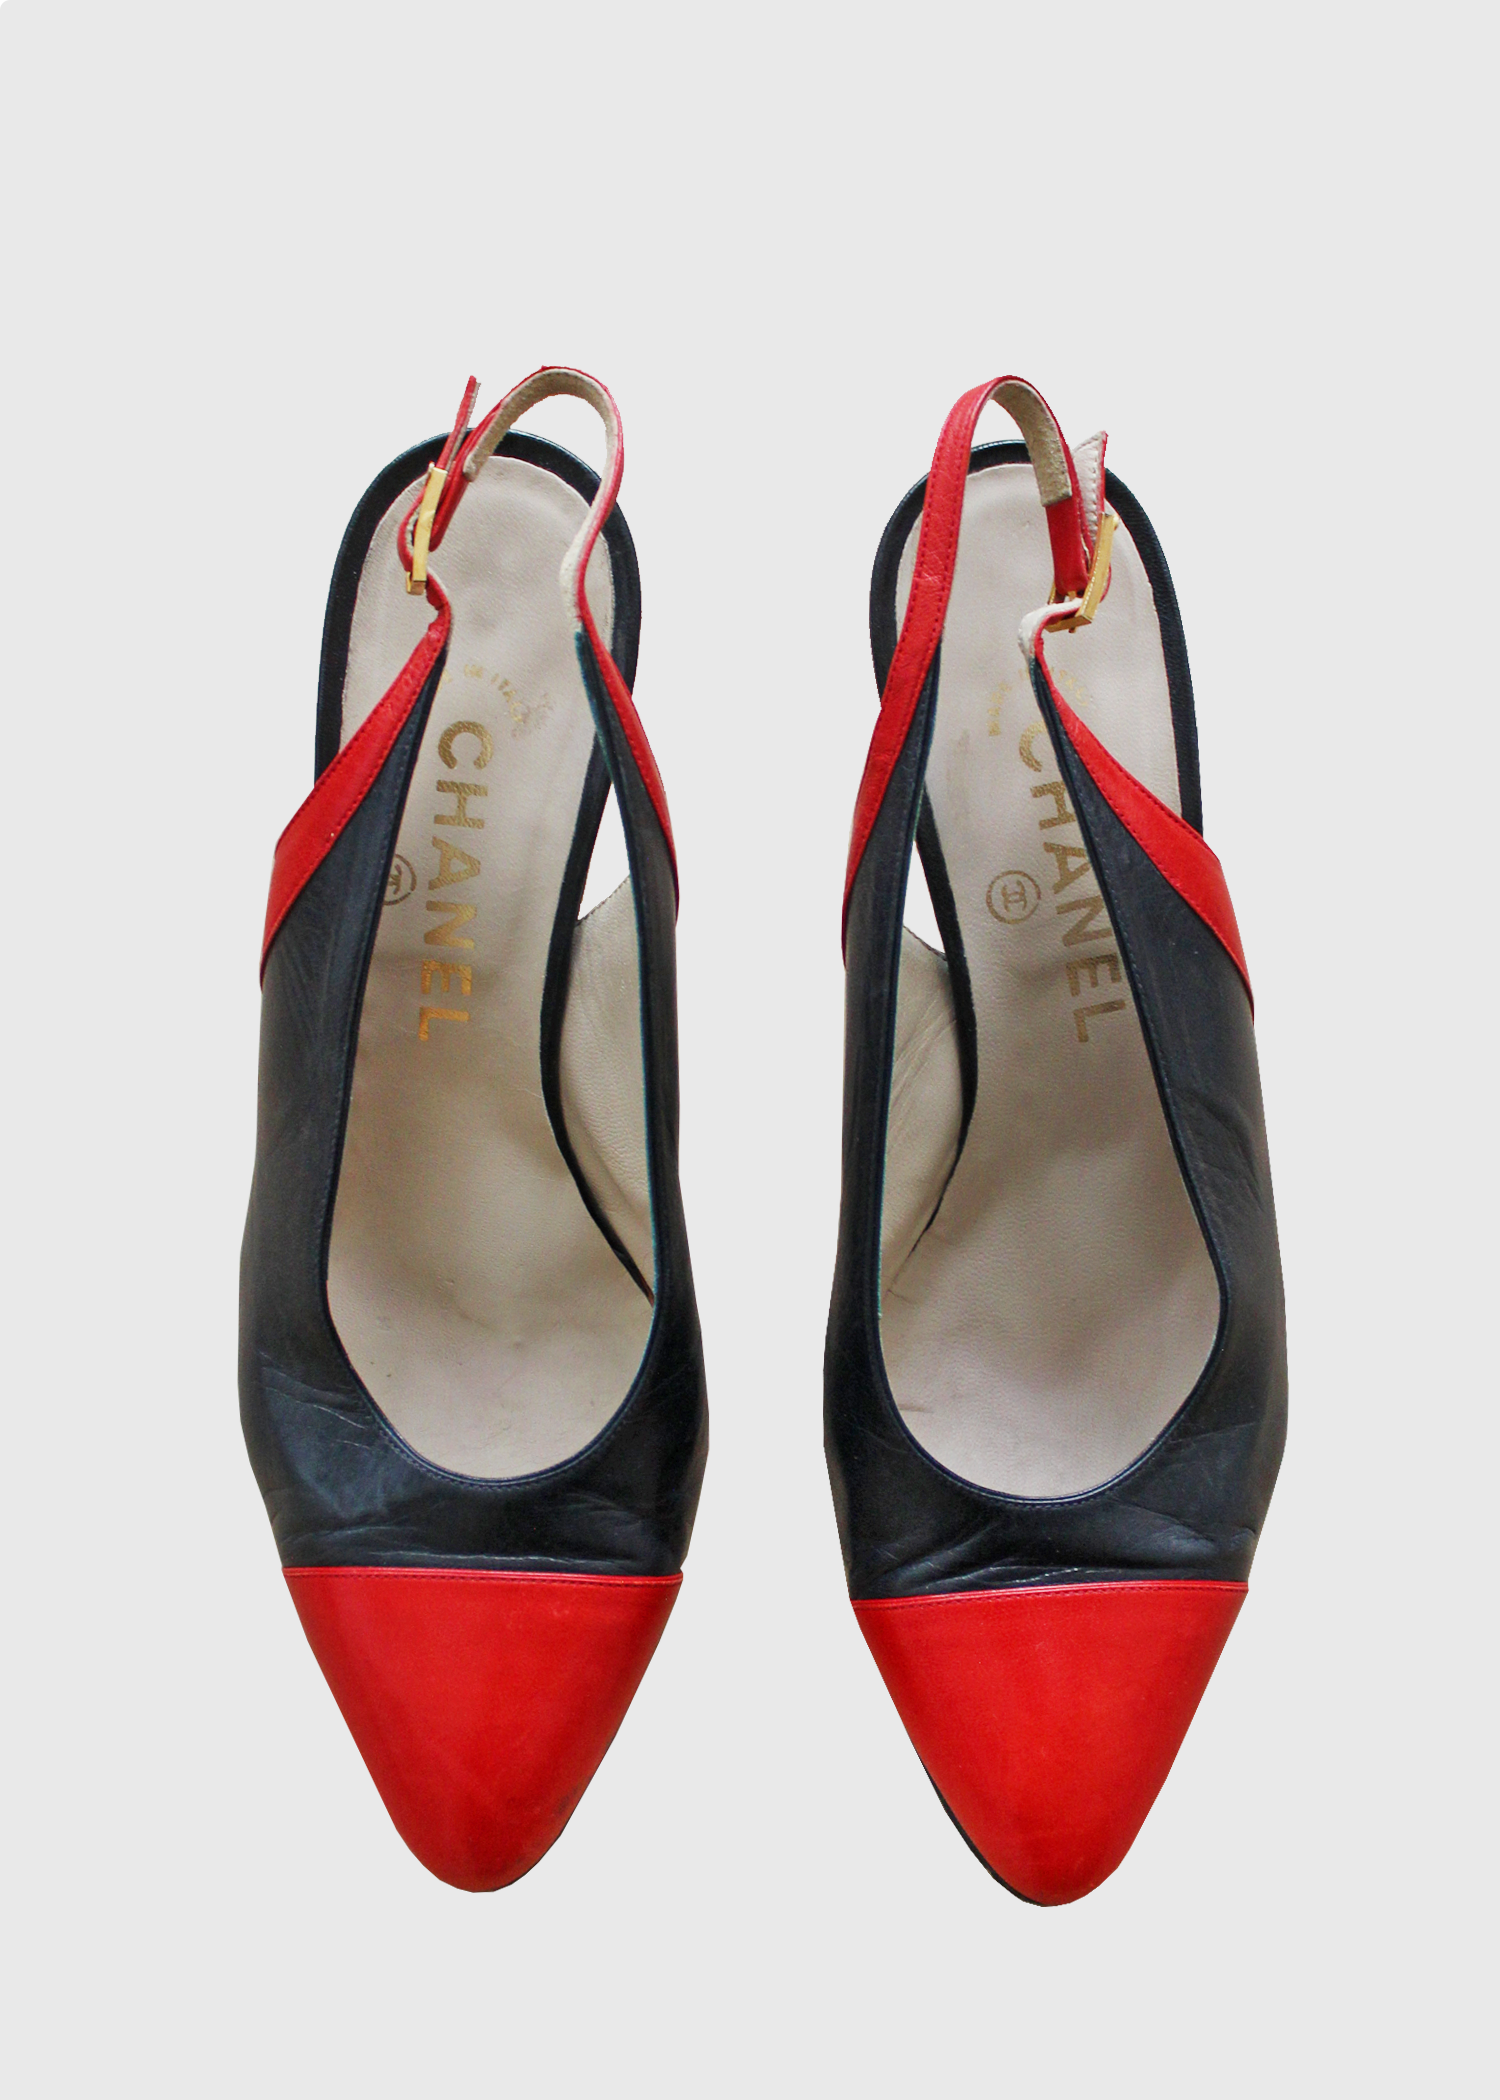 Chanel Vtg Navy and Red Slingbacks- Size 7.5